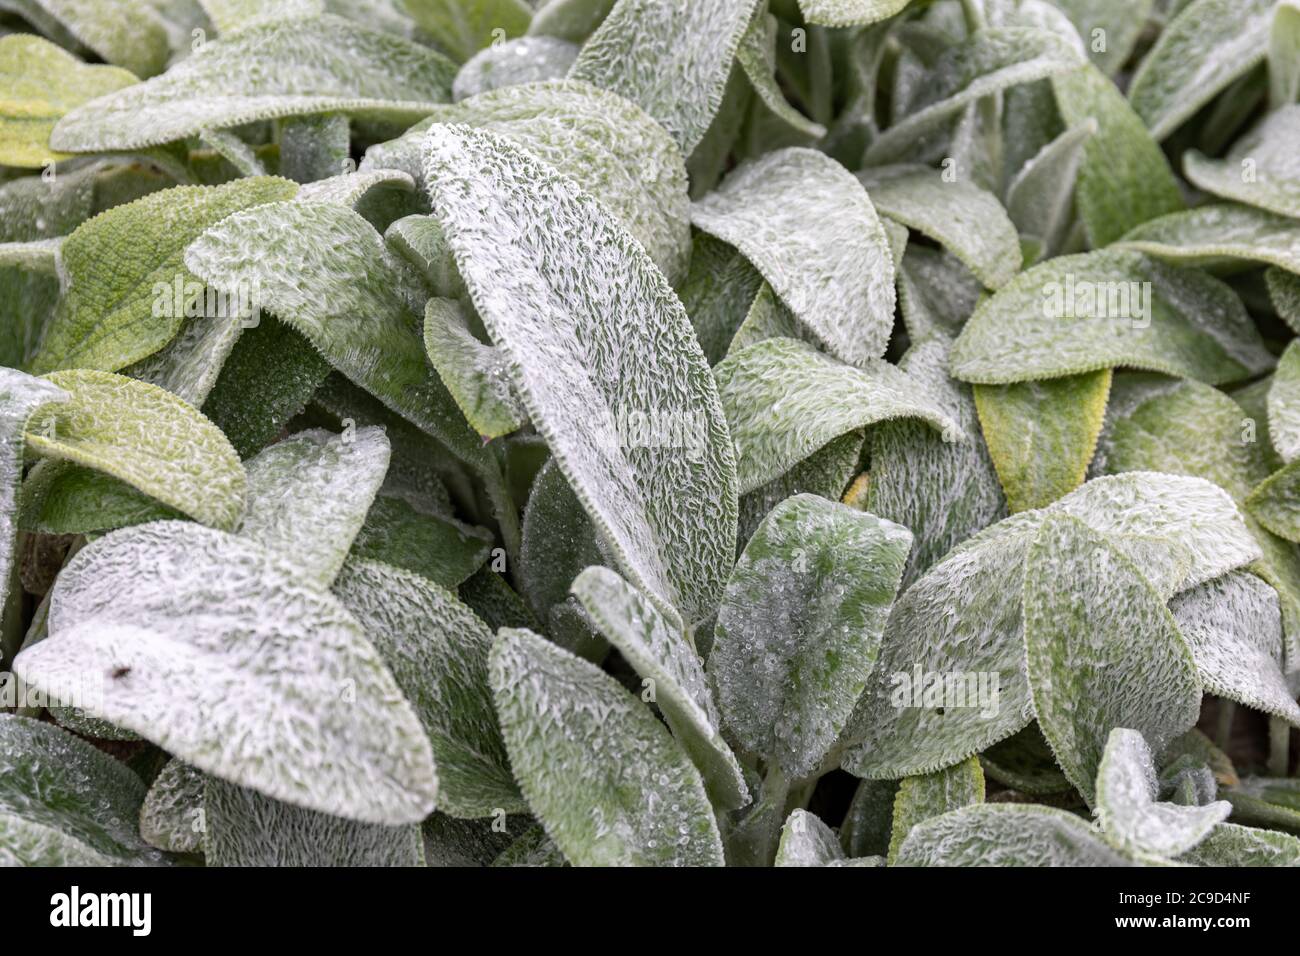 Hair coated leaves of Stachys byzantina or lamb's-ear or woolly hedgenettle Stock Photo